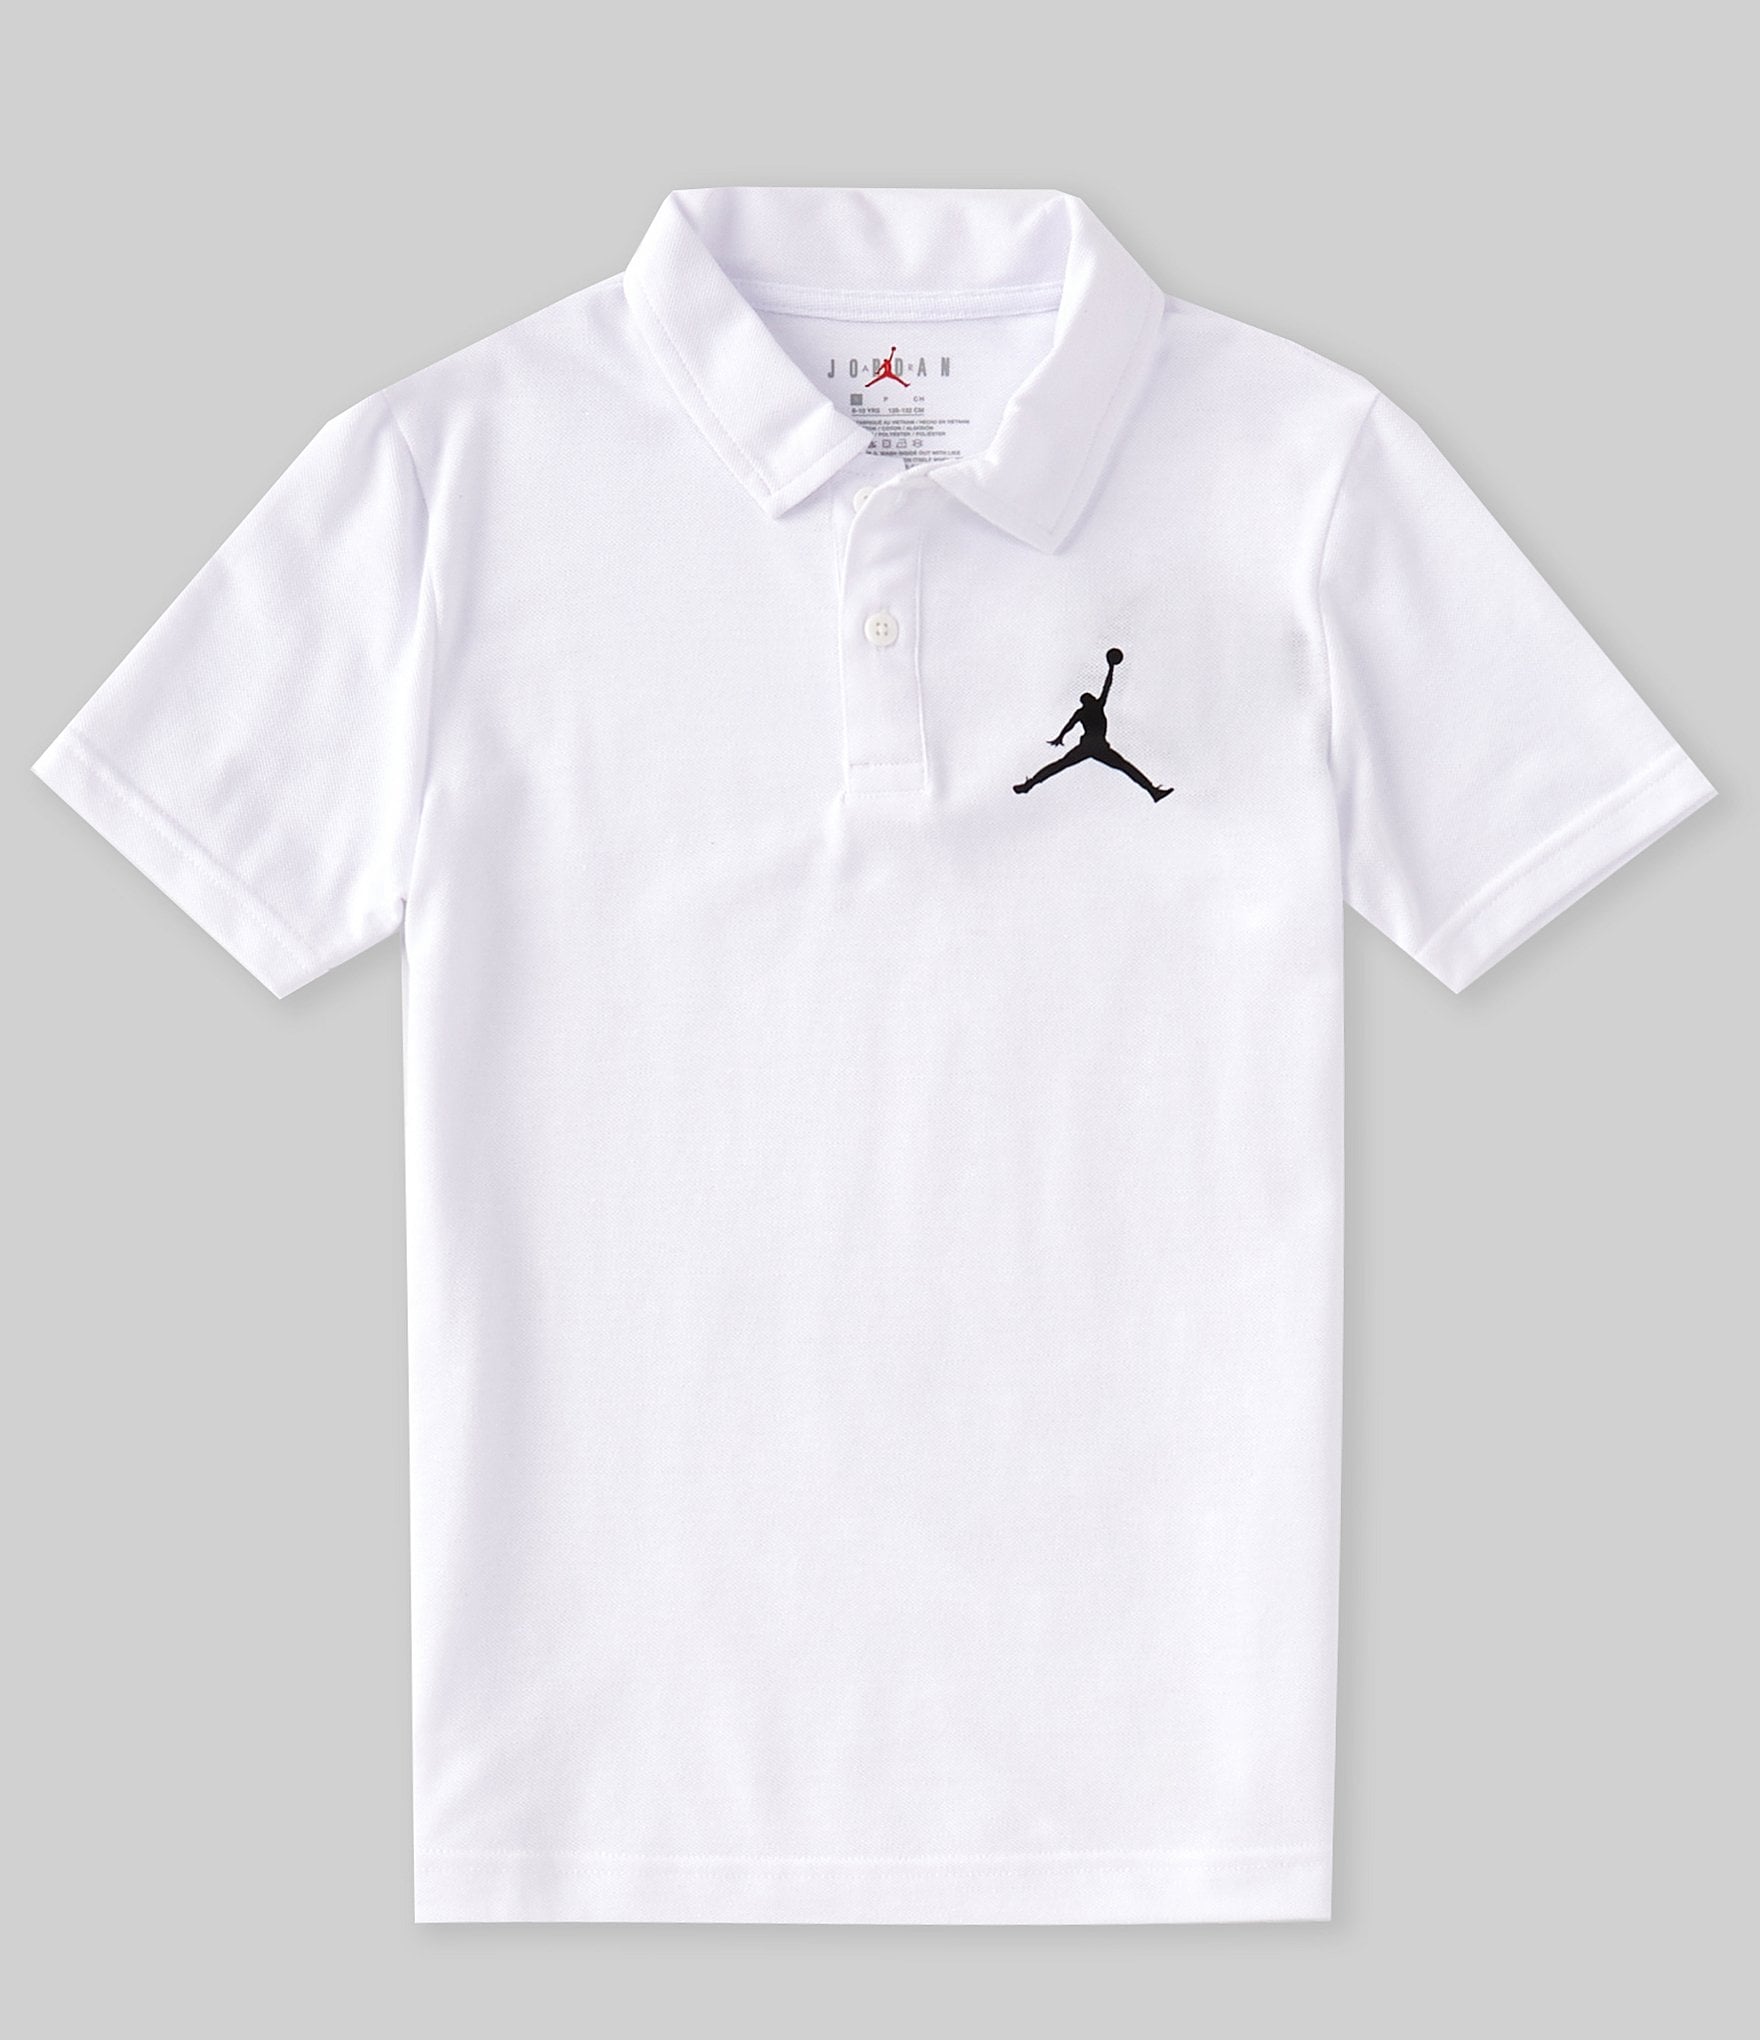  Boys Classic Fit Short Sleeves Pique Polo Shirt: Clothing,  Shoes & Jewelry